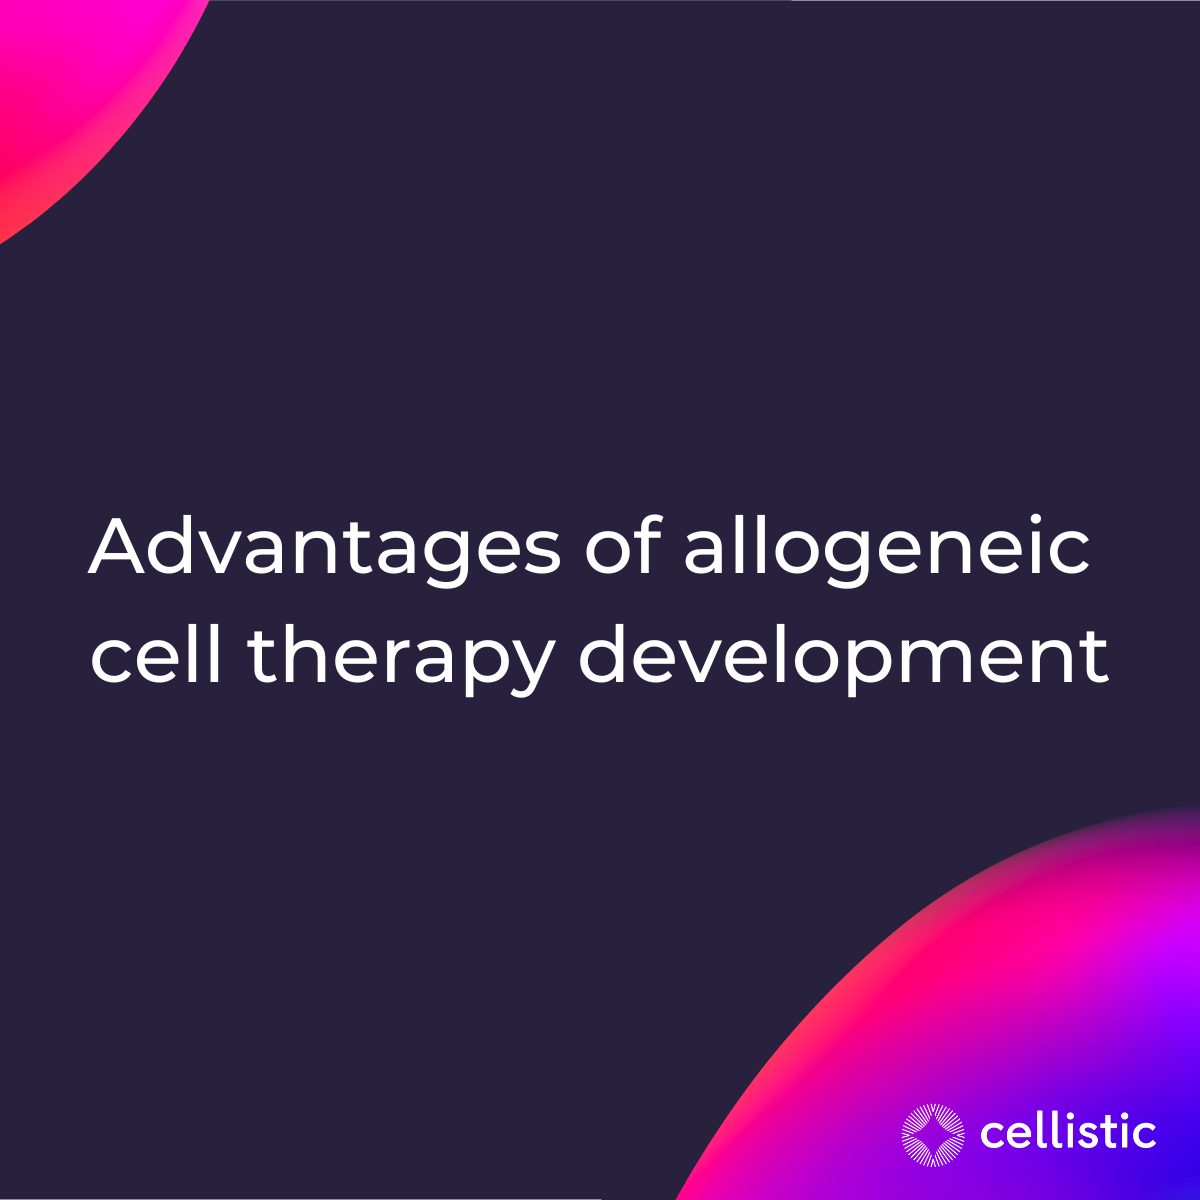 The benefits of allogeneic cell therapy